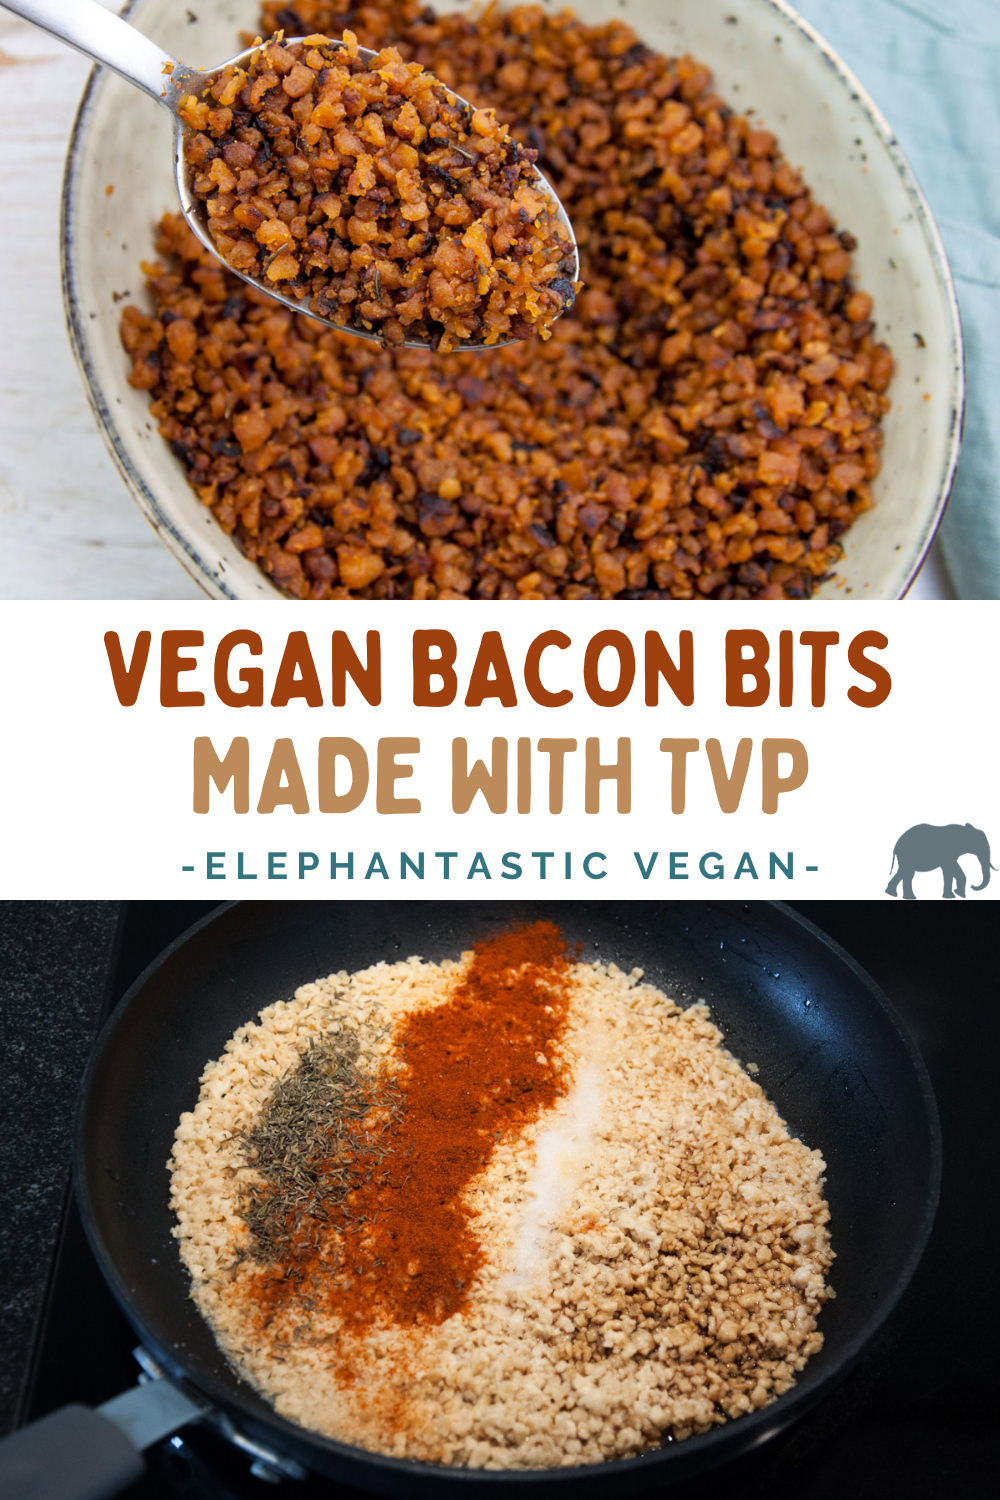 Vegan Bacon Bits made with TVP